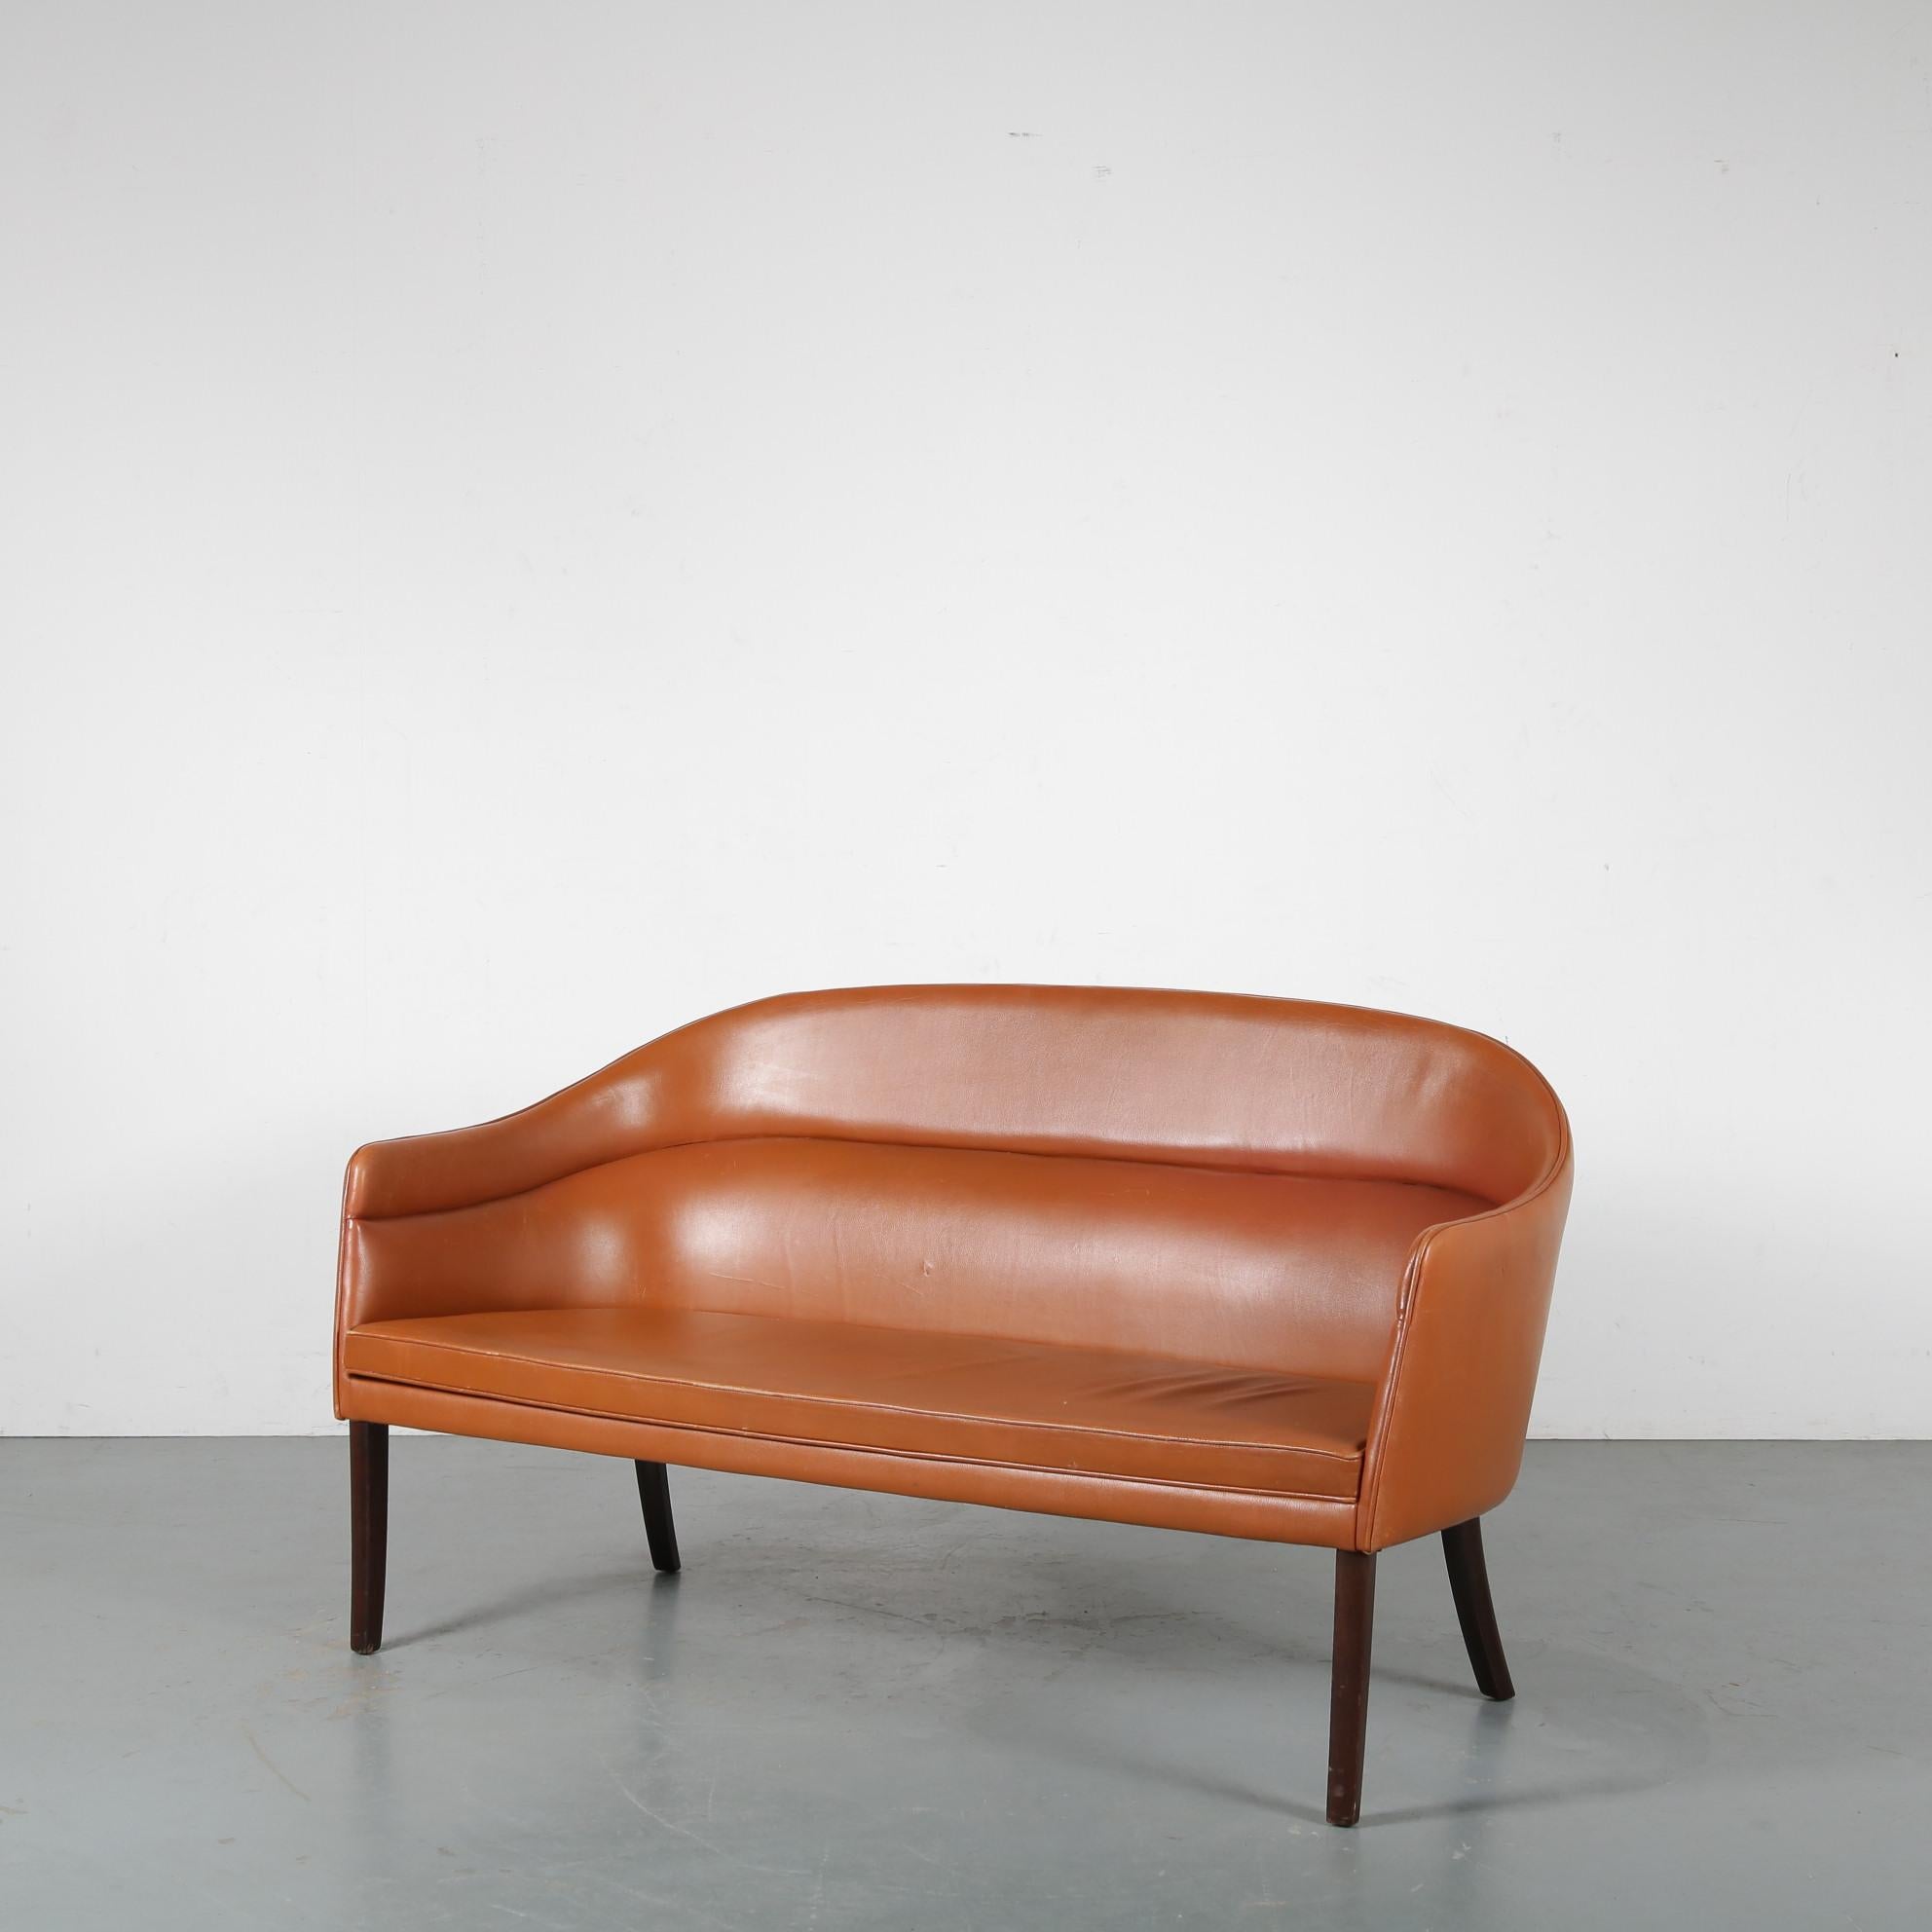 An outstanding, very rare 2-seater sofa designed by Ole Wanscher, manufactured by J. Jeppesen in Denmark around 1950.

This impressive piece is really well made by on of the greatest Danish designers. It has elegant, tall wooden legs and the seat